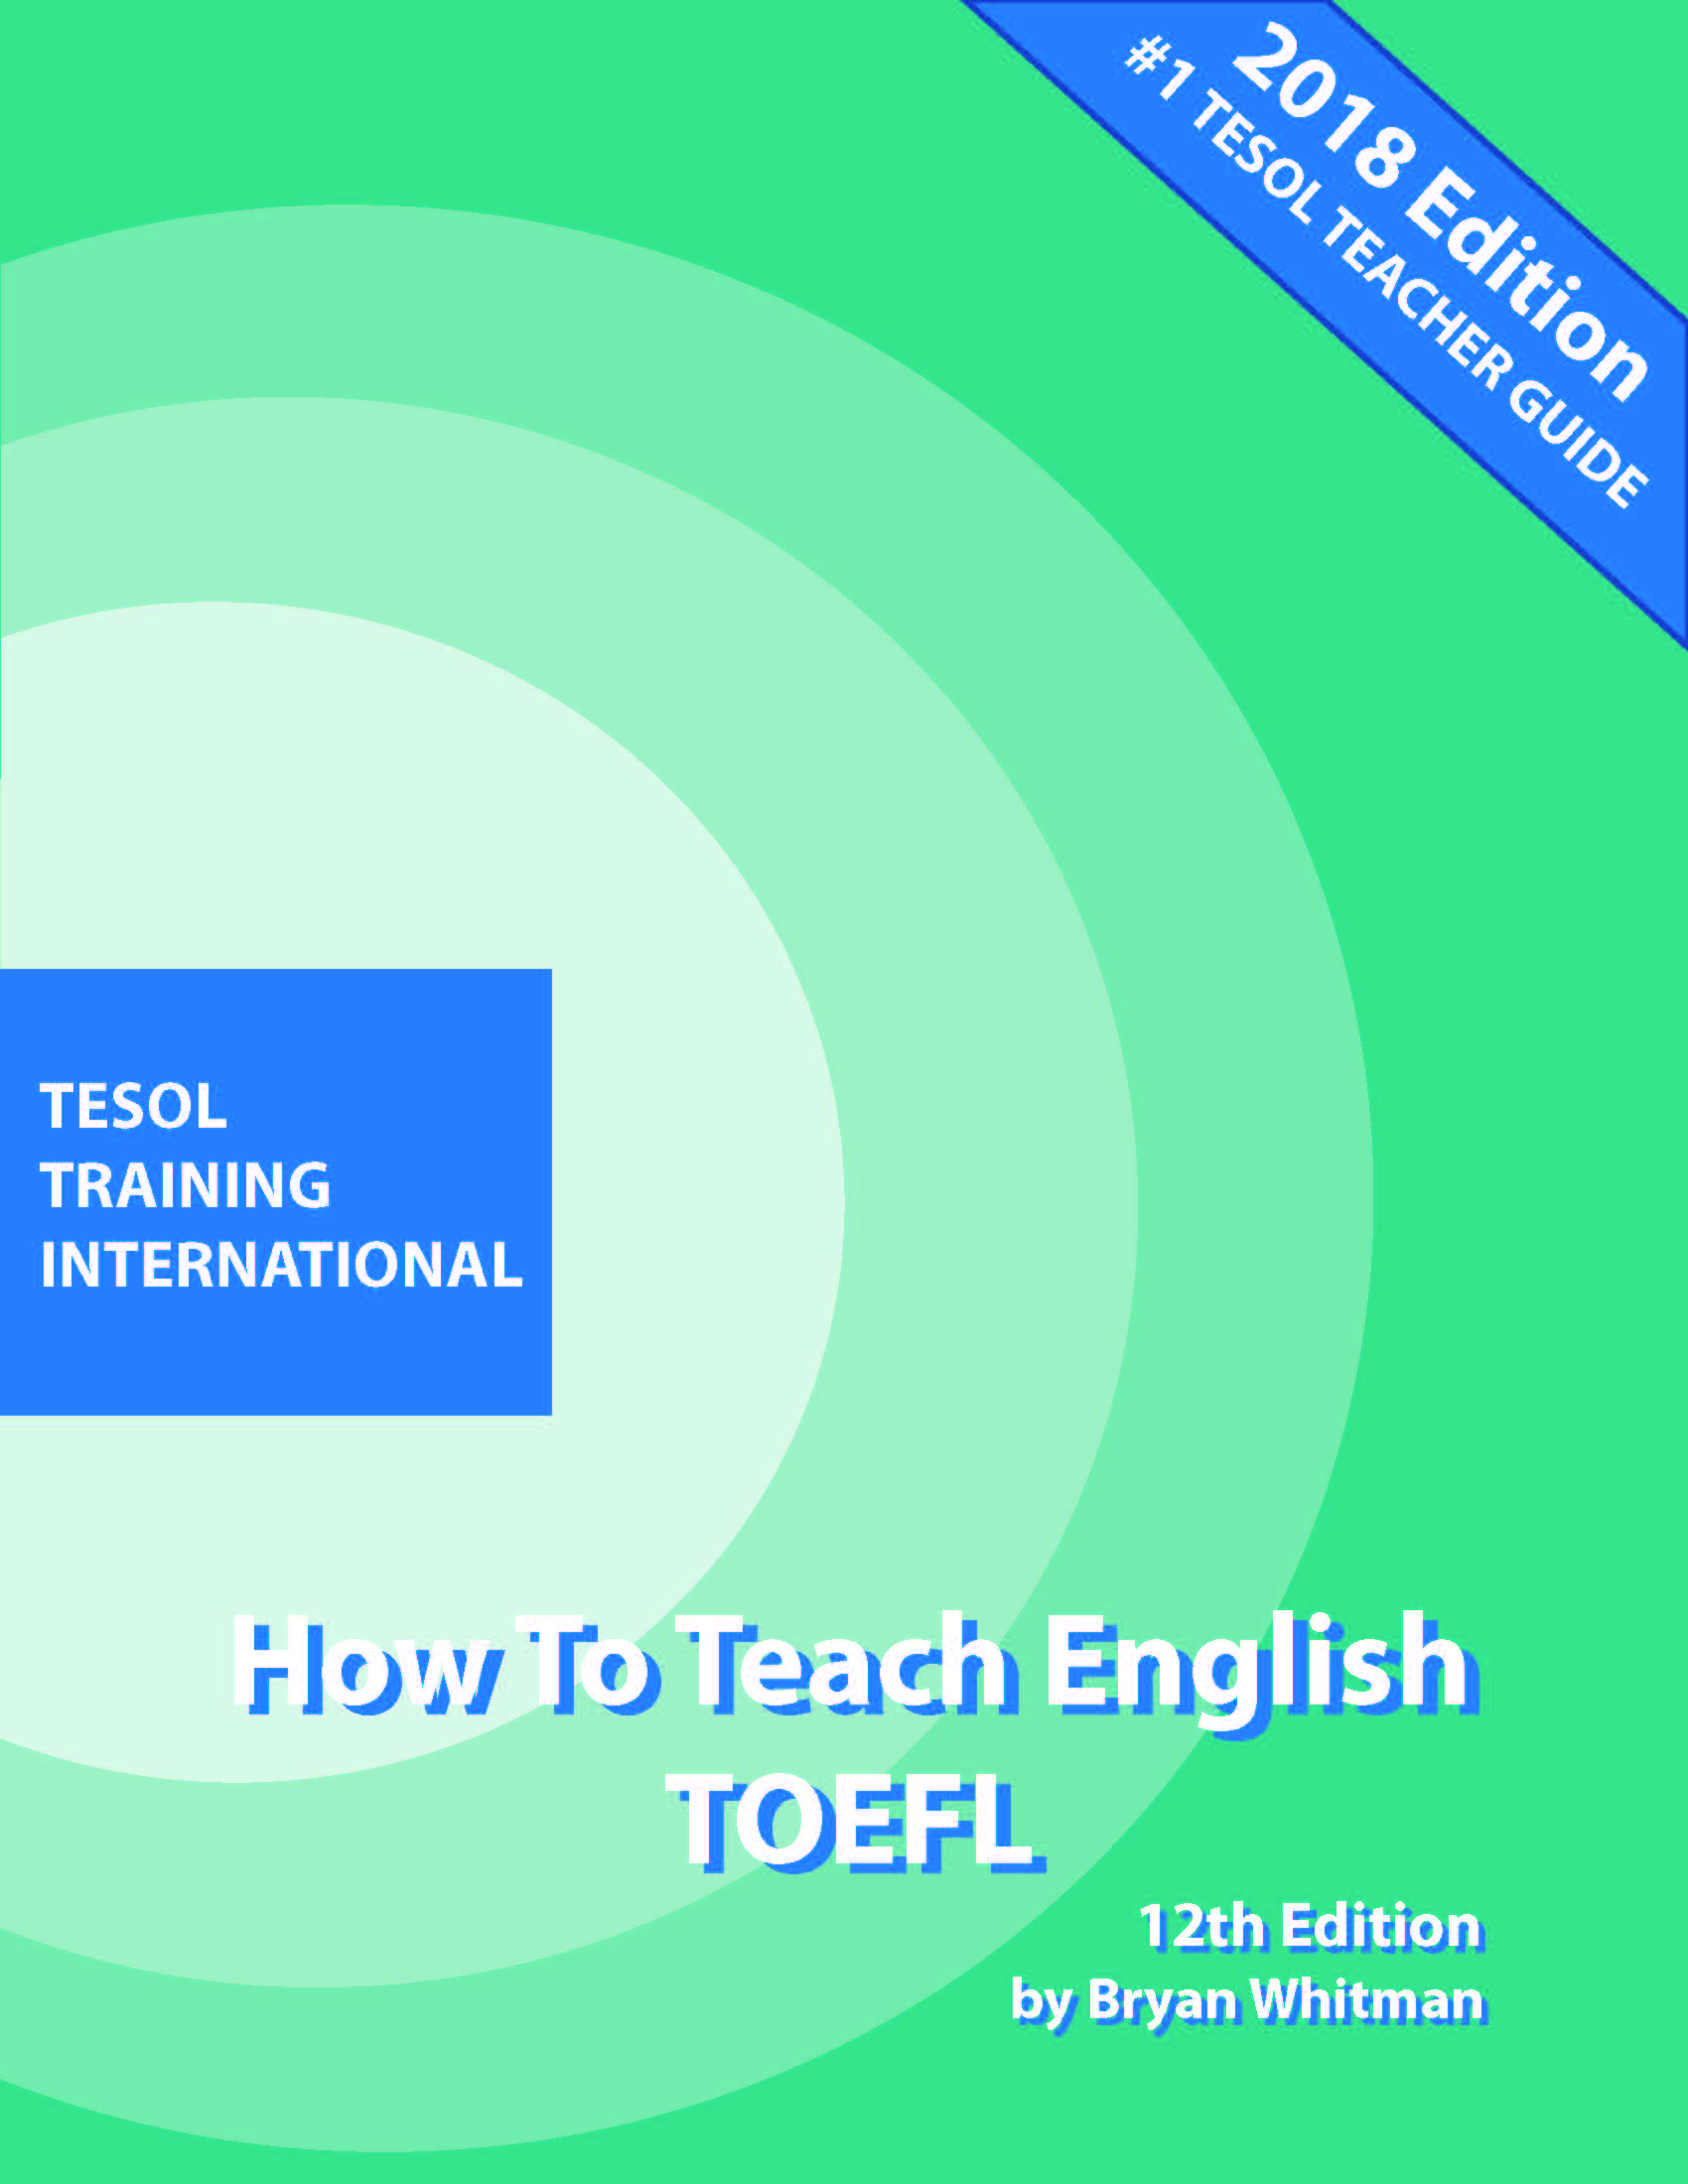 Teaching TOEFL (Test of English as a Foreign Language)